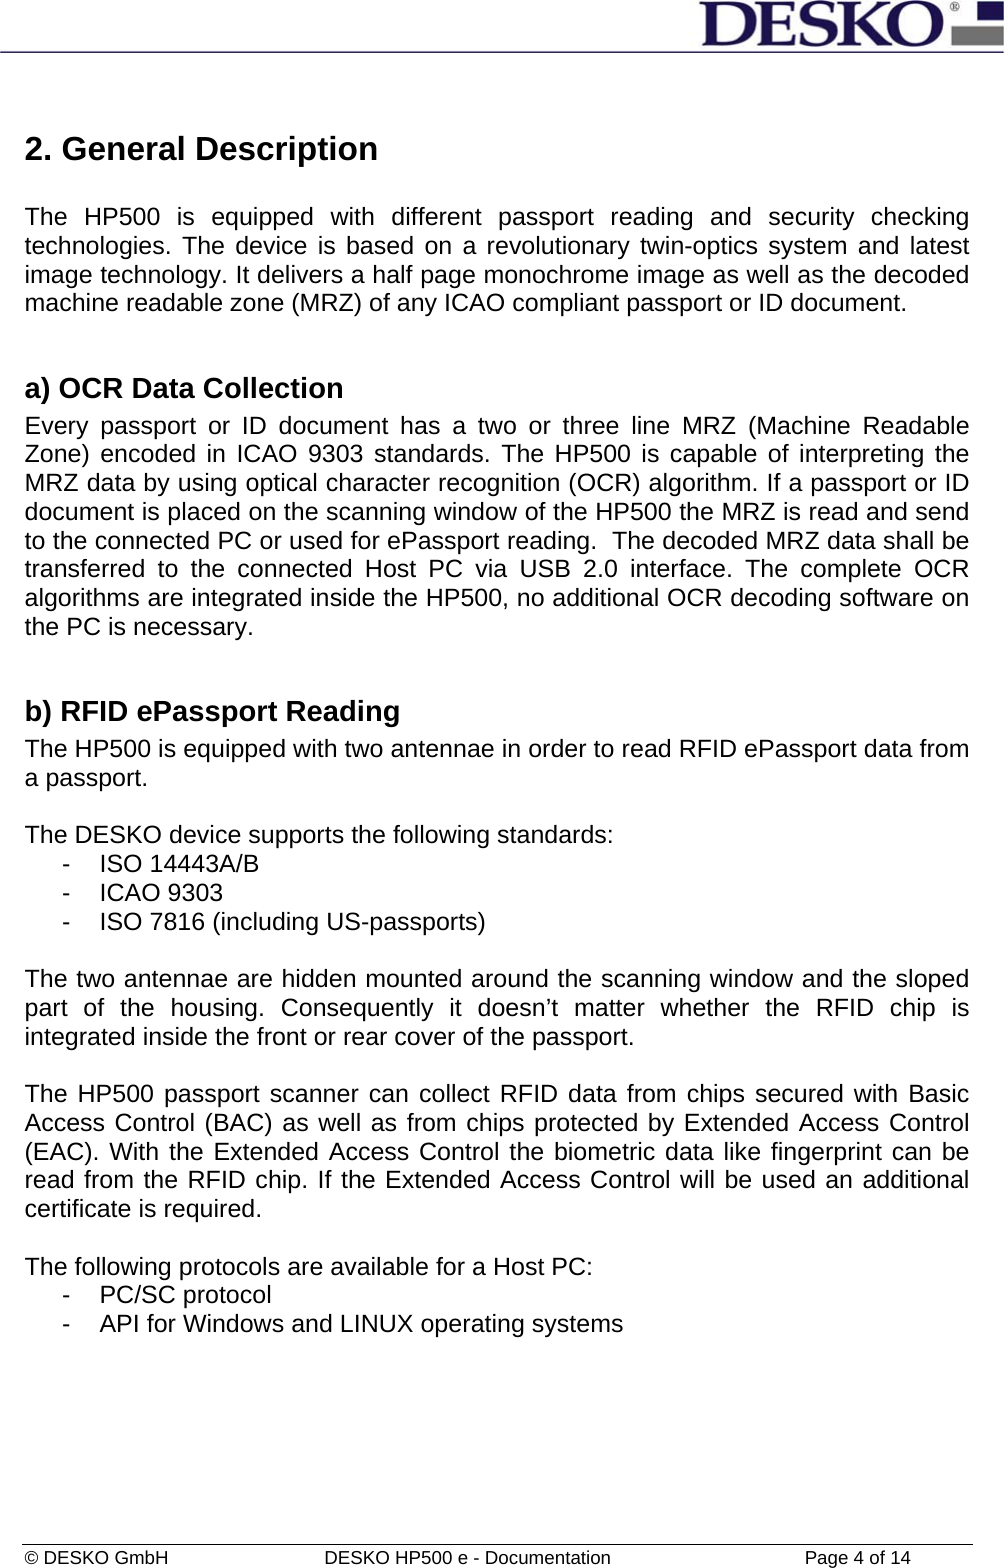  © DESKO GmbH   DESKO HP500 e - Documentation                  Page 4 of 14  2. General Description  The HP500 is equipped with different passport reading and security checking technologies. The device is based on a revolutionary twin-optics system and latest image technology. It delivers a half page monochrome image as well as the decoded machine readable zone (MRZ) of any ICAO compliant passport or ID document.  a) OCR Data Collection Every passport or ID document has a two or three line MRZ (Machine Readable Zone) encoded in ICAO 9303 standards. The HP500 is capable of interpreting the MRZ data by using optical character recognition (OCR) algorithm. If a passport or ID document is placed on the scanning window of the HP500 the MRZ is read and send to the connected PC or used for ePassport reading.  The decoded MRZ data shall be transferred to the connected Host PC via USB 2.0 interface. The complete OCR algorithms are integrated inside the HP500, no additional OCR decoding software on the PC is necessary.  b) RFID ePassport Reading The HP500 is equipped with two antennae in order to read RFID ePassport data from a passport.   The DESKO device supports the following standards:  - ISO 14443A/B - ICAO 9303 -  ISO 7816 (including US-passports)  The two antennae are hidden mounted around the scanning window and the sloped part of the housing. Consequently it doesn’t matter whether the RFID chip is integrated inside the front or rear cover of the passport.   The HP500 passport scanner can collect RFID data from chips secured with Basic Access Control (BAC) as well as from chips protected by Extended Access Control (EAC). With the Extended Access Control the biometric data like fingerprint can be read from the RFID chip. If the Extended Access Control will be used an additional certificate is required.  The following protocols are available for a Host PC: -  PC/SC protocol  -  API for Windows and LINUX operating systems    